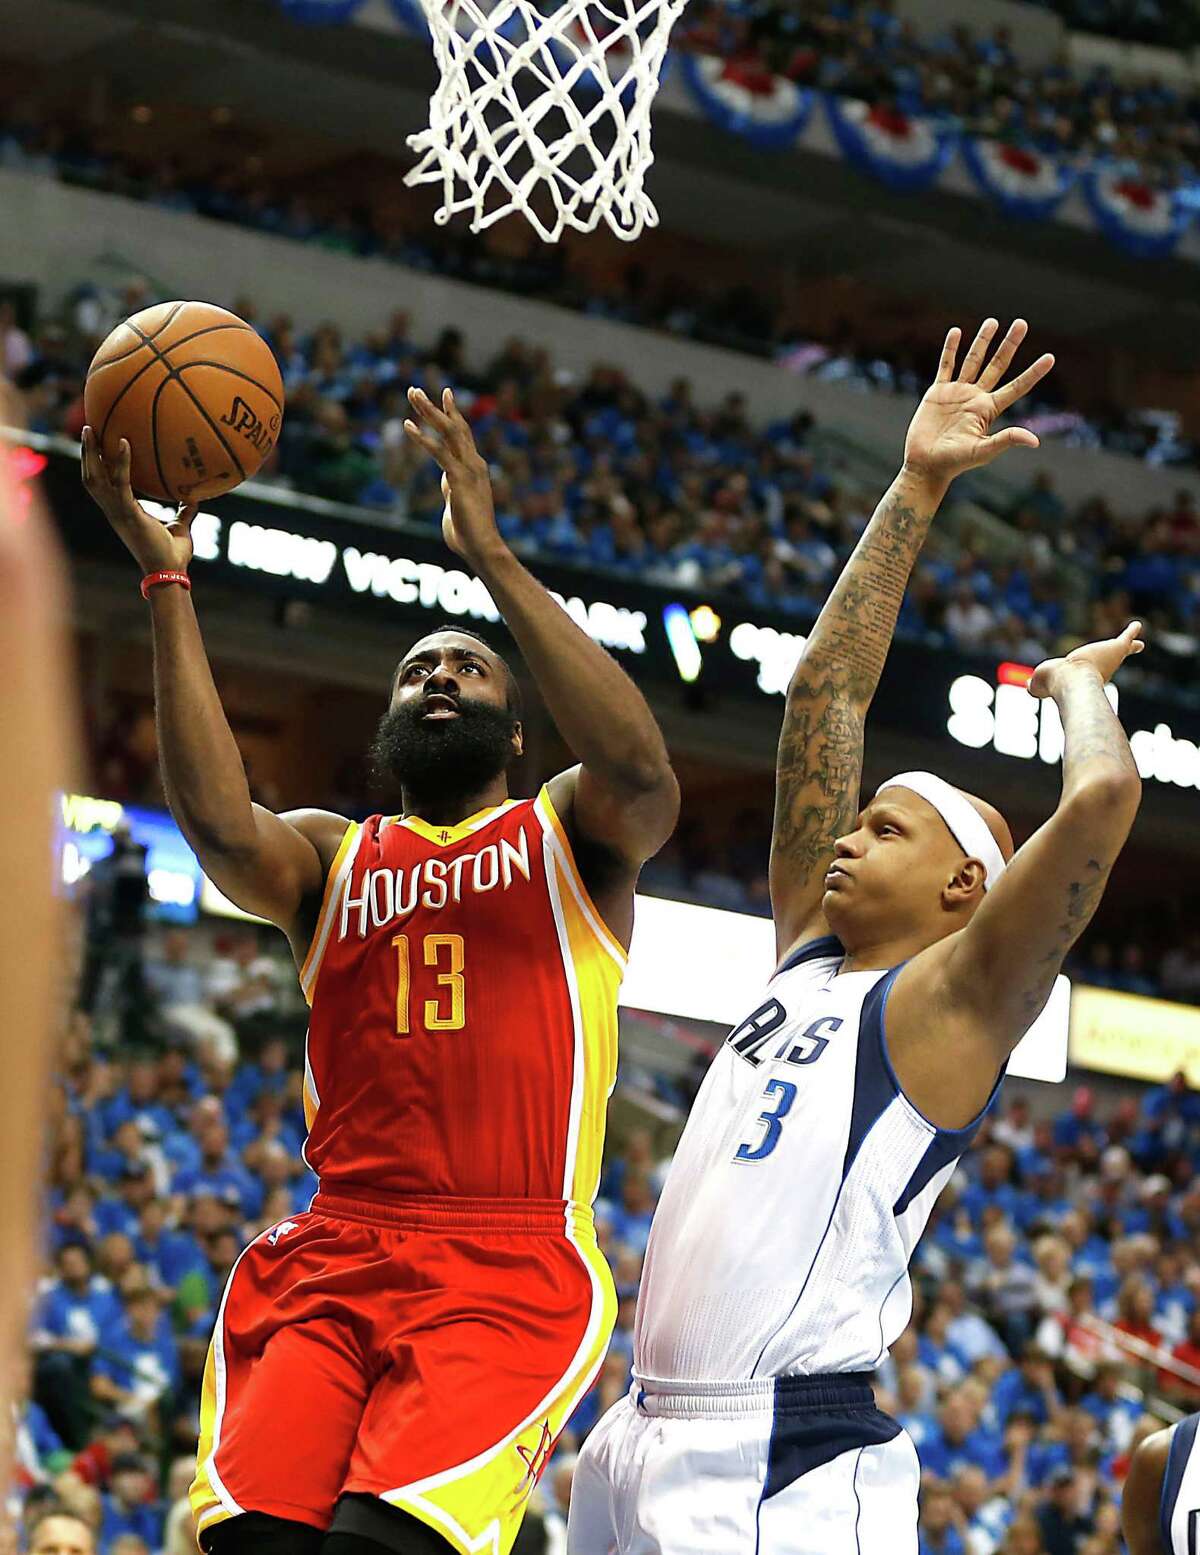 Houston Rockets guard James Harden goes for a lay-up while Dallas Mavericks forward Charlie Villanueva defends during the first half of Game 4 in the first round of NBA basketball playoffs at the American Airlines Center Sunday, April 26, 2015, in Dallas. ( James Nielsen / Houston Chronicle )